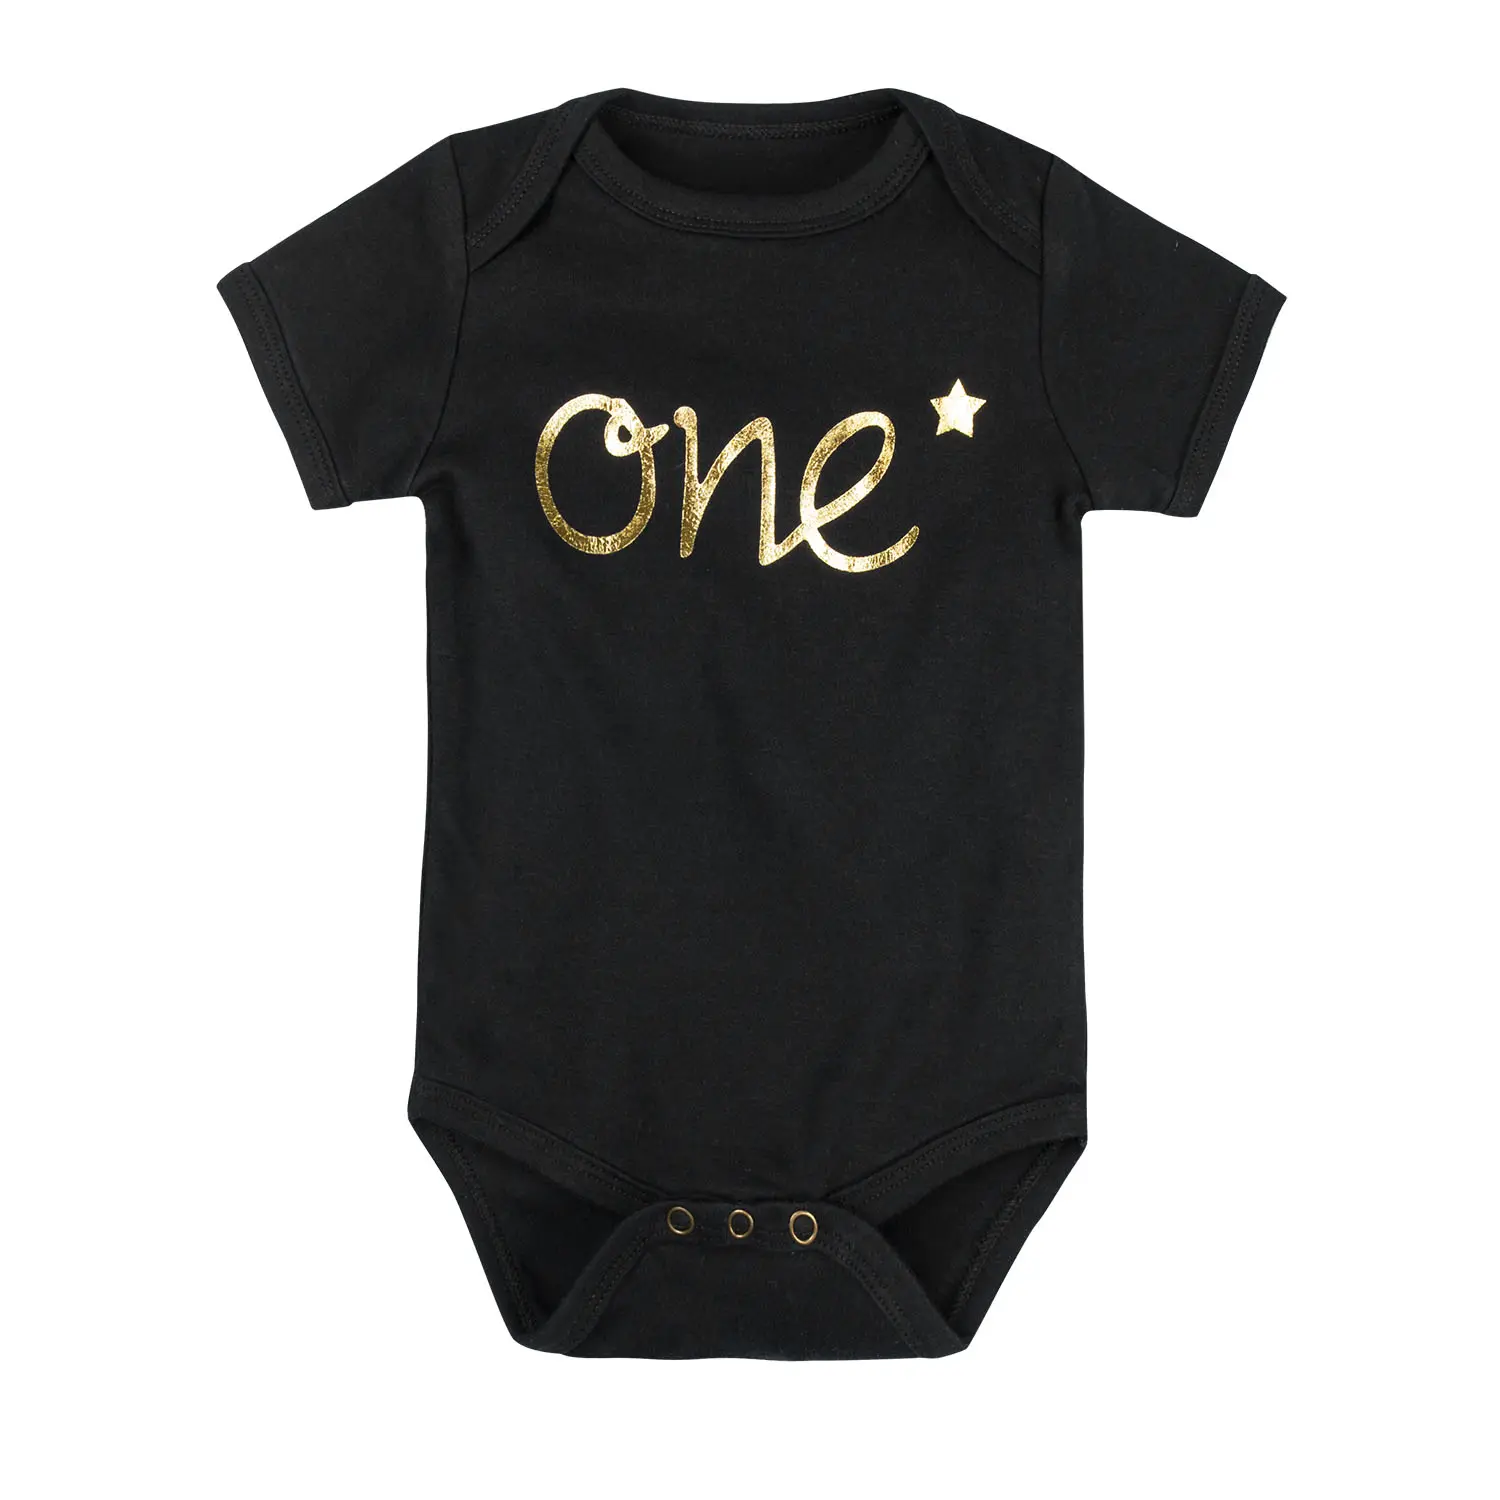 BKD Gold Foil Printed Toddler Baby First Birthday Clothes Organic Cotton Long and Short Sleeve 1st Birthday Onsie for Infant